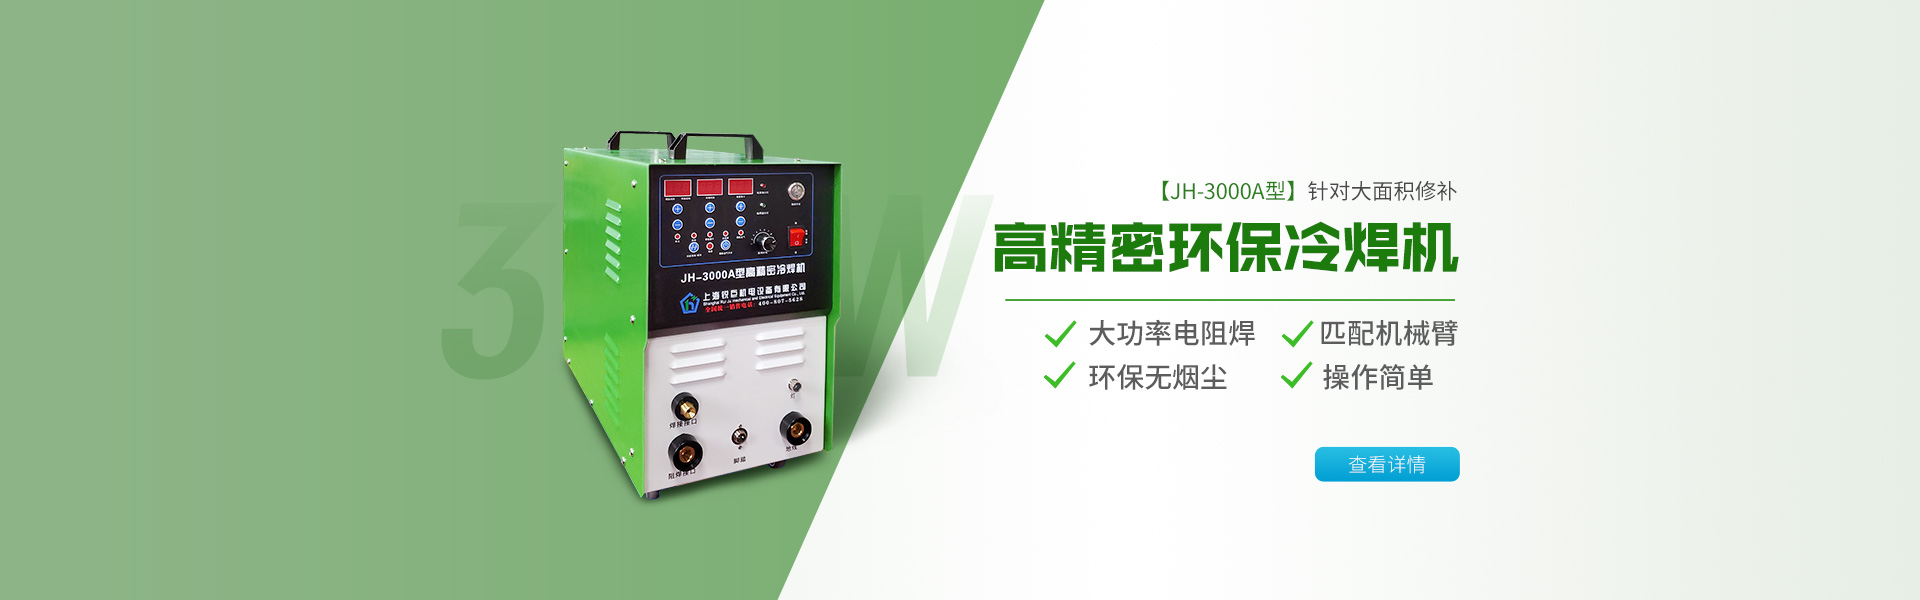 There are many kinds of cold welding machines. How to choose a suitable cold welding machine